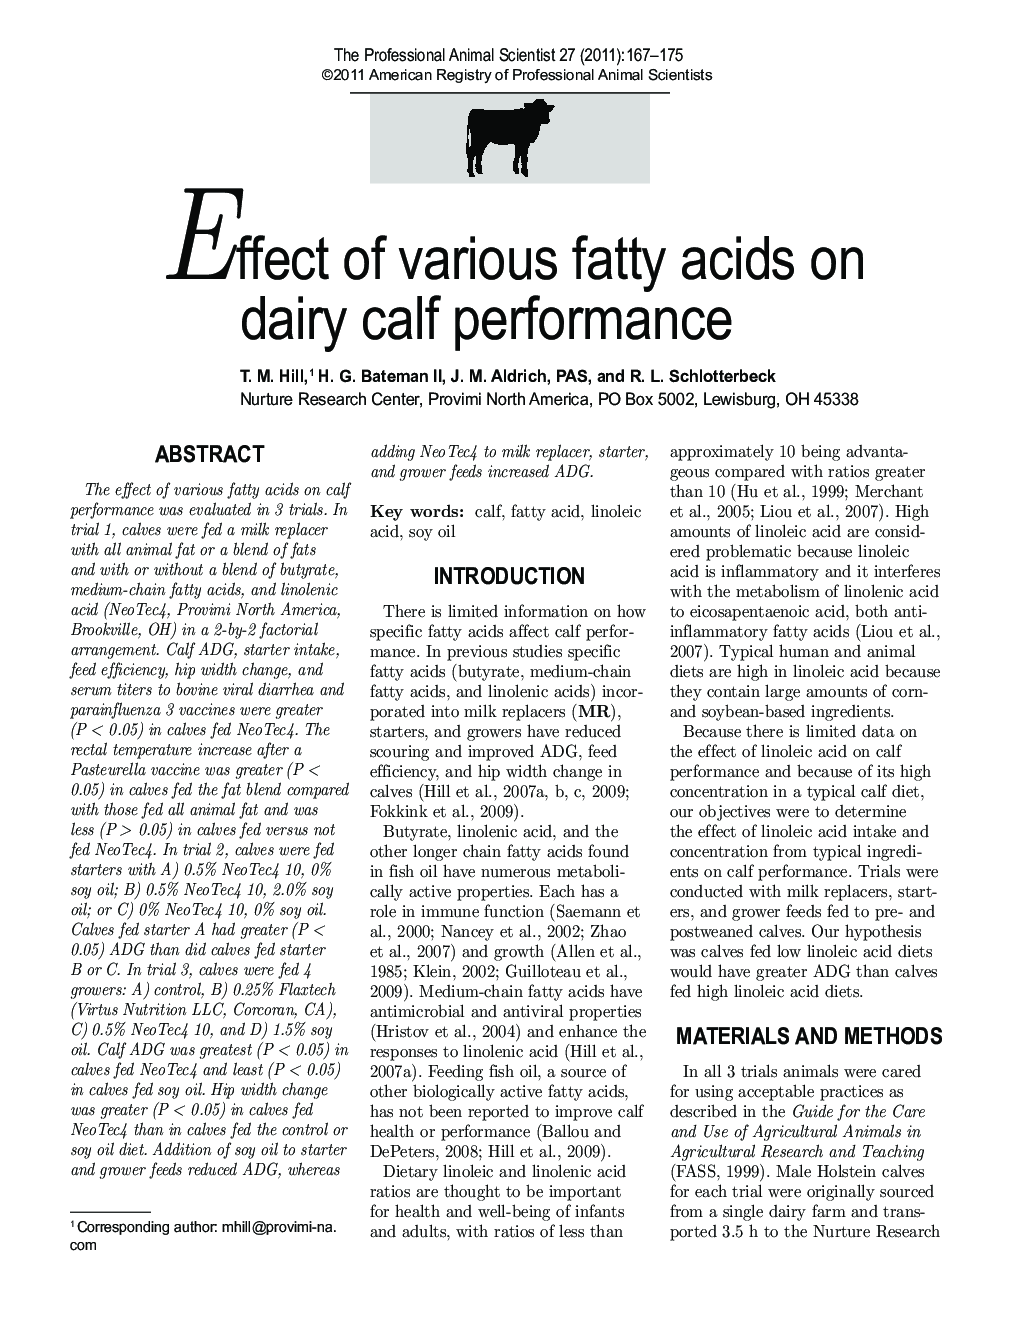 Effect of various fatty acids on dairy calf performance